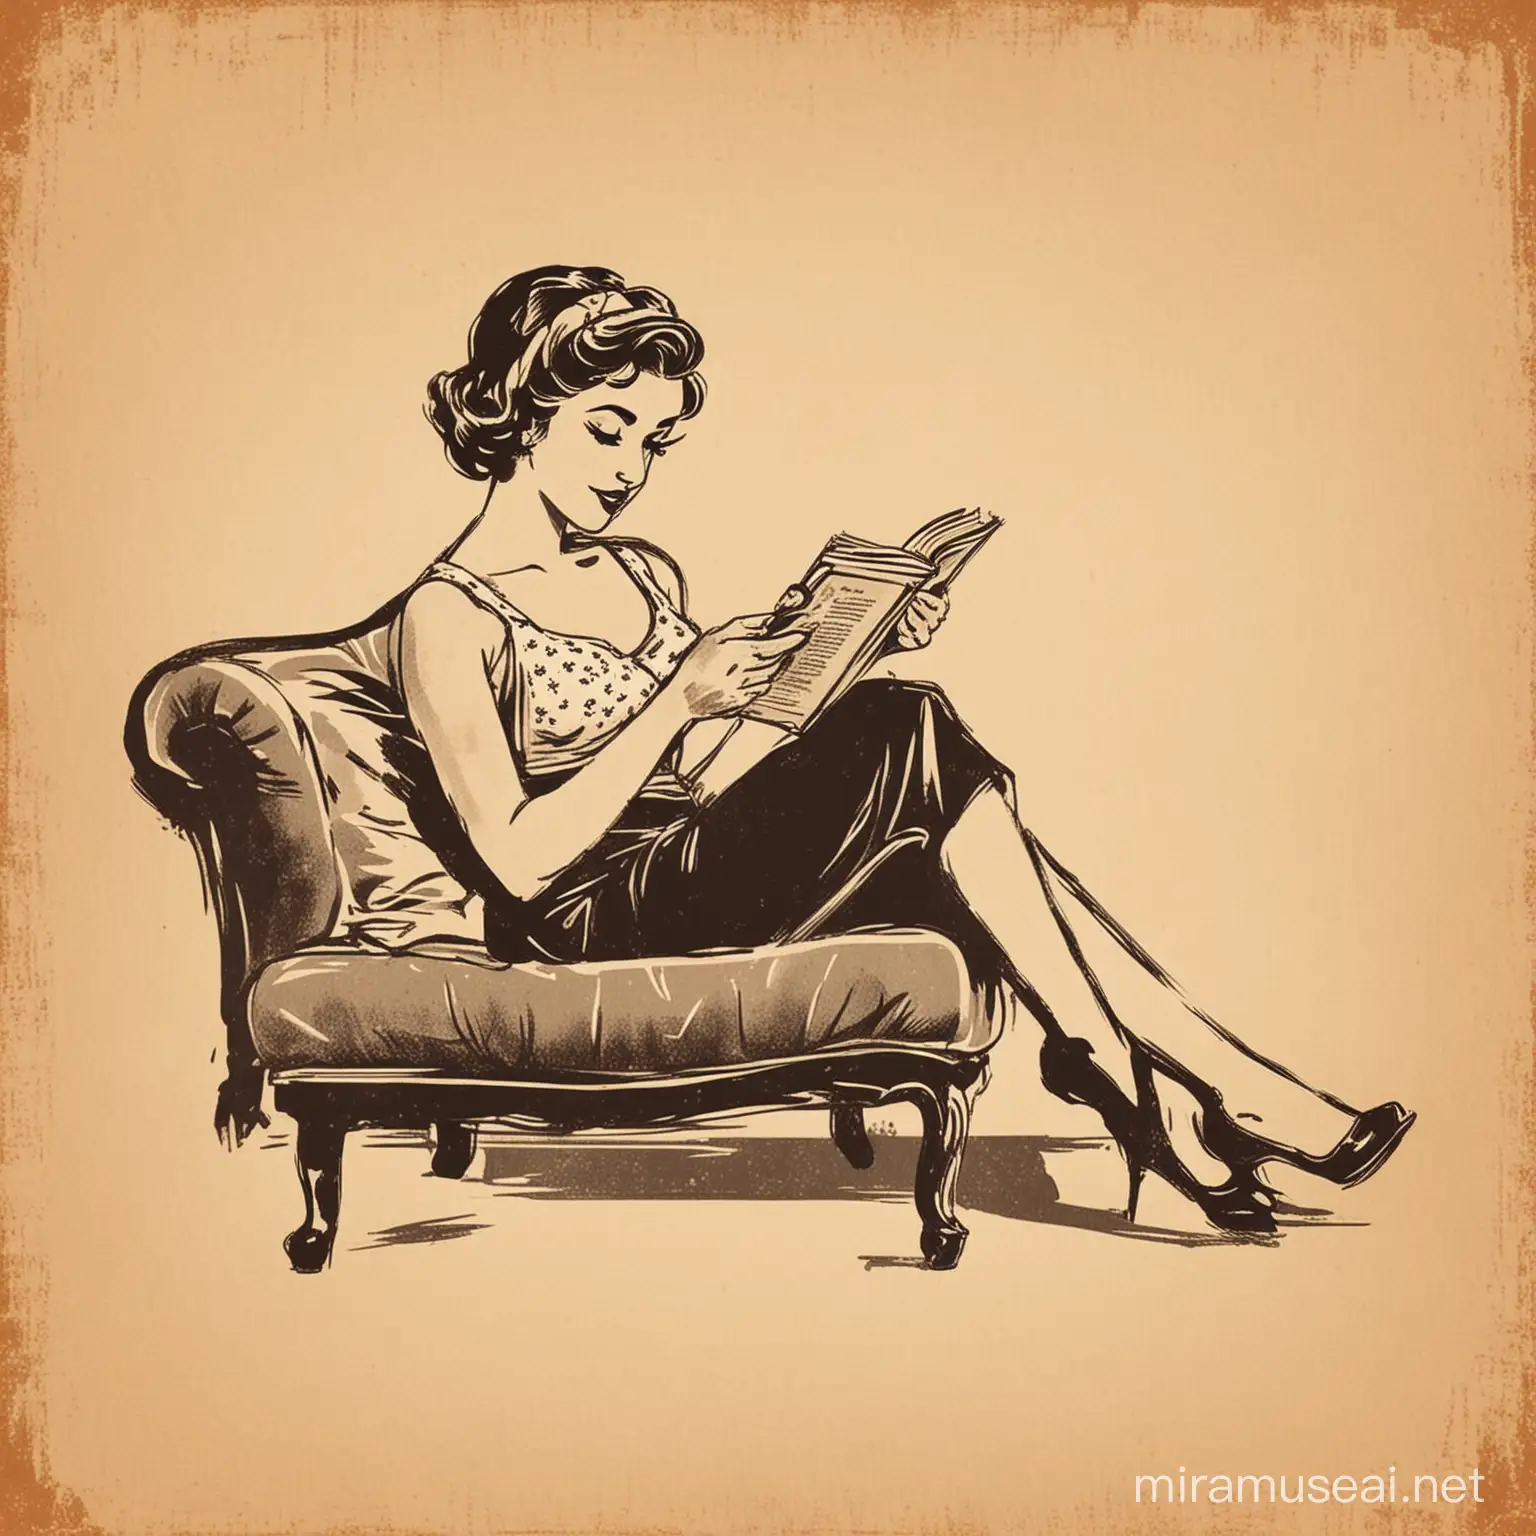 Vintage Minimalist Stencil Art Poster Featuring Relaxing Pinup Lady Reading